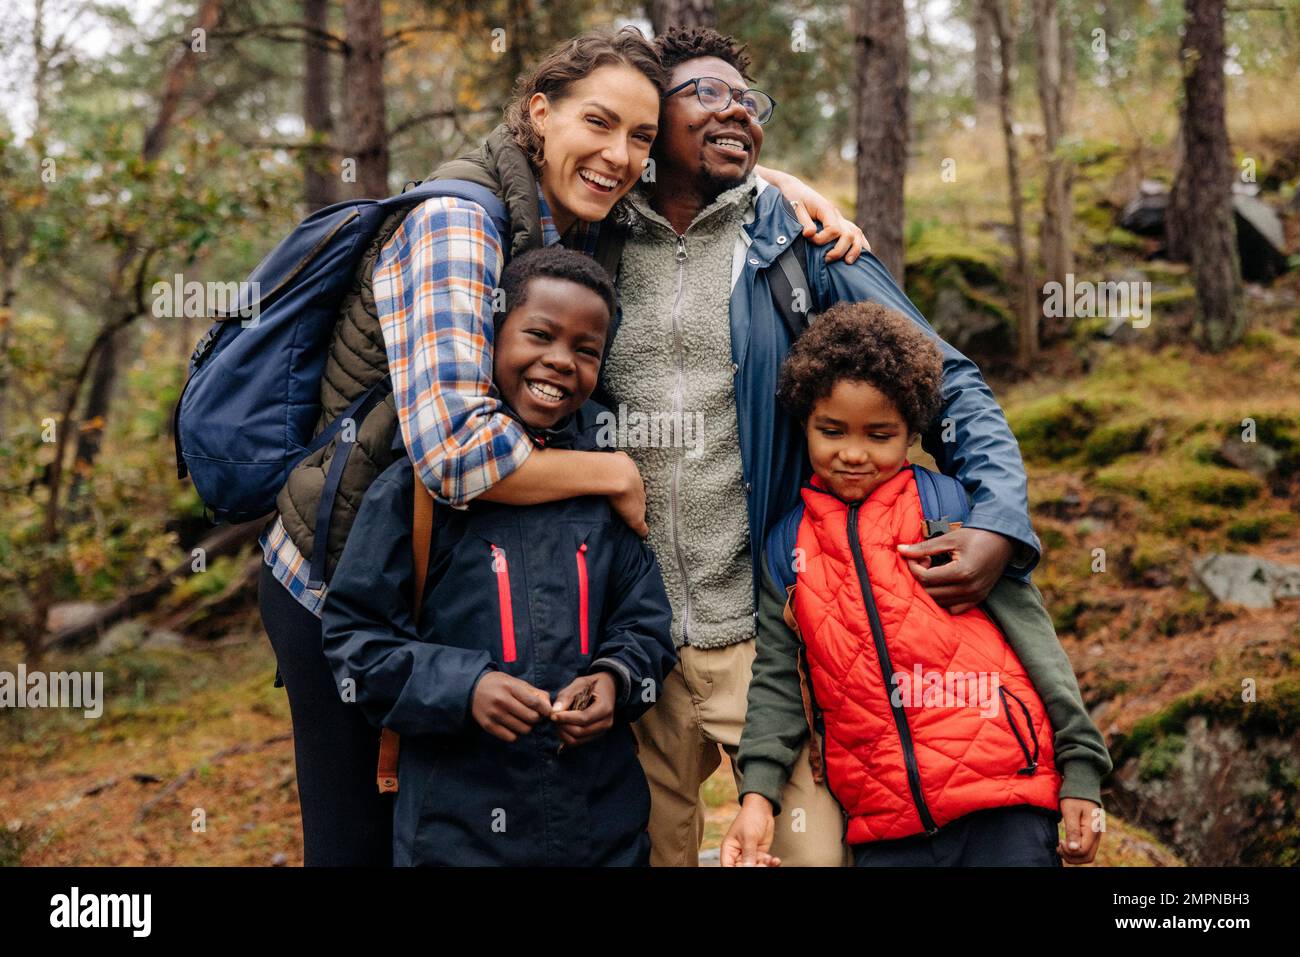 Happy family embracing each other while hiking in forest Stock Photo